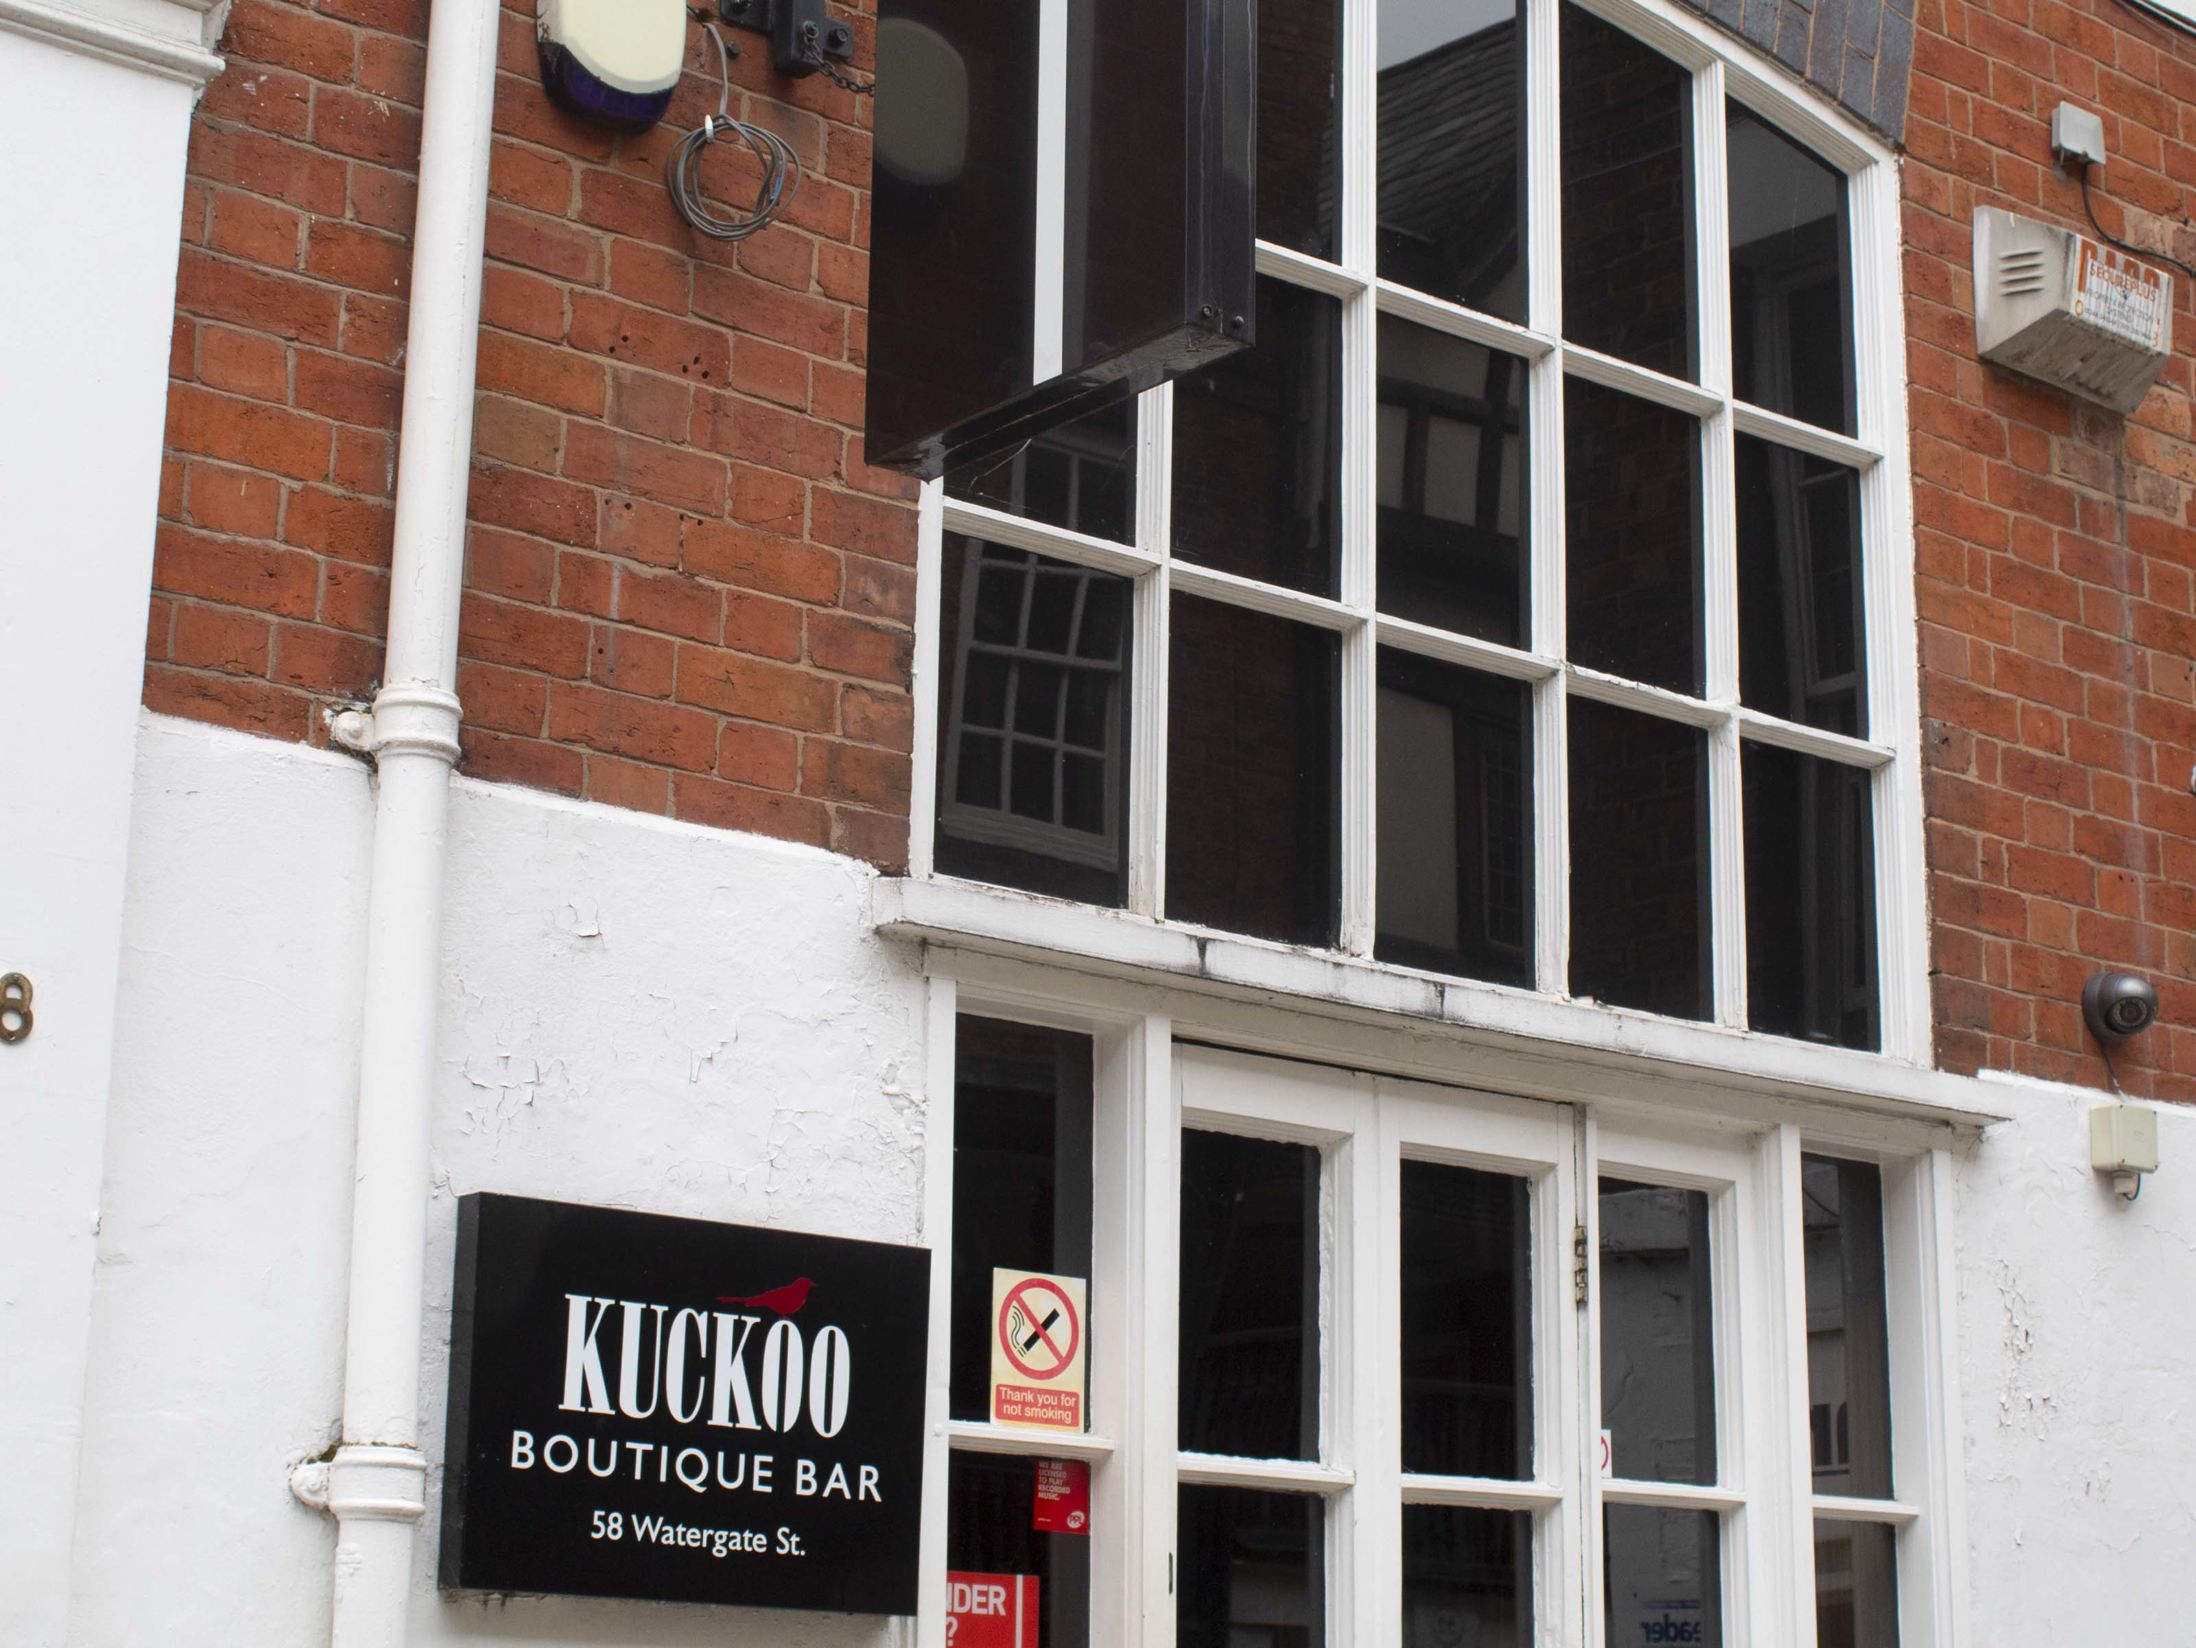 Kuckoo - Cocktail Bars in Chester